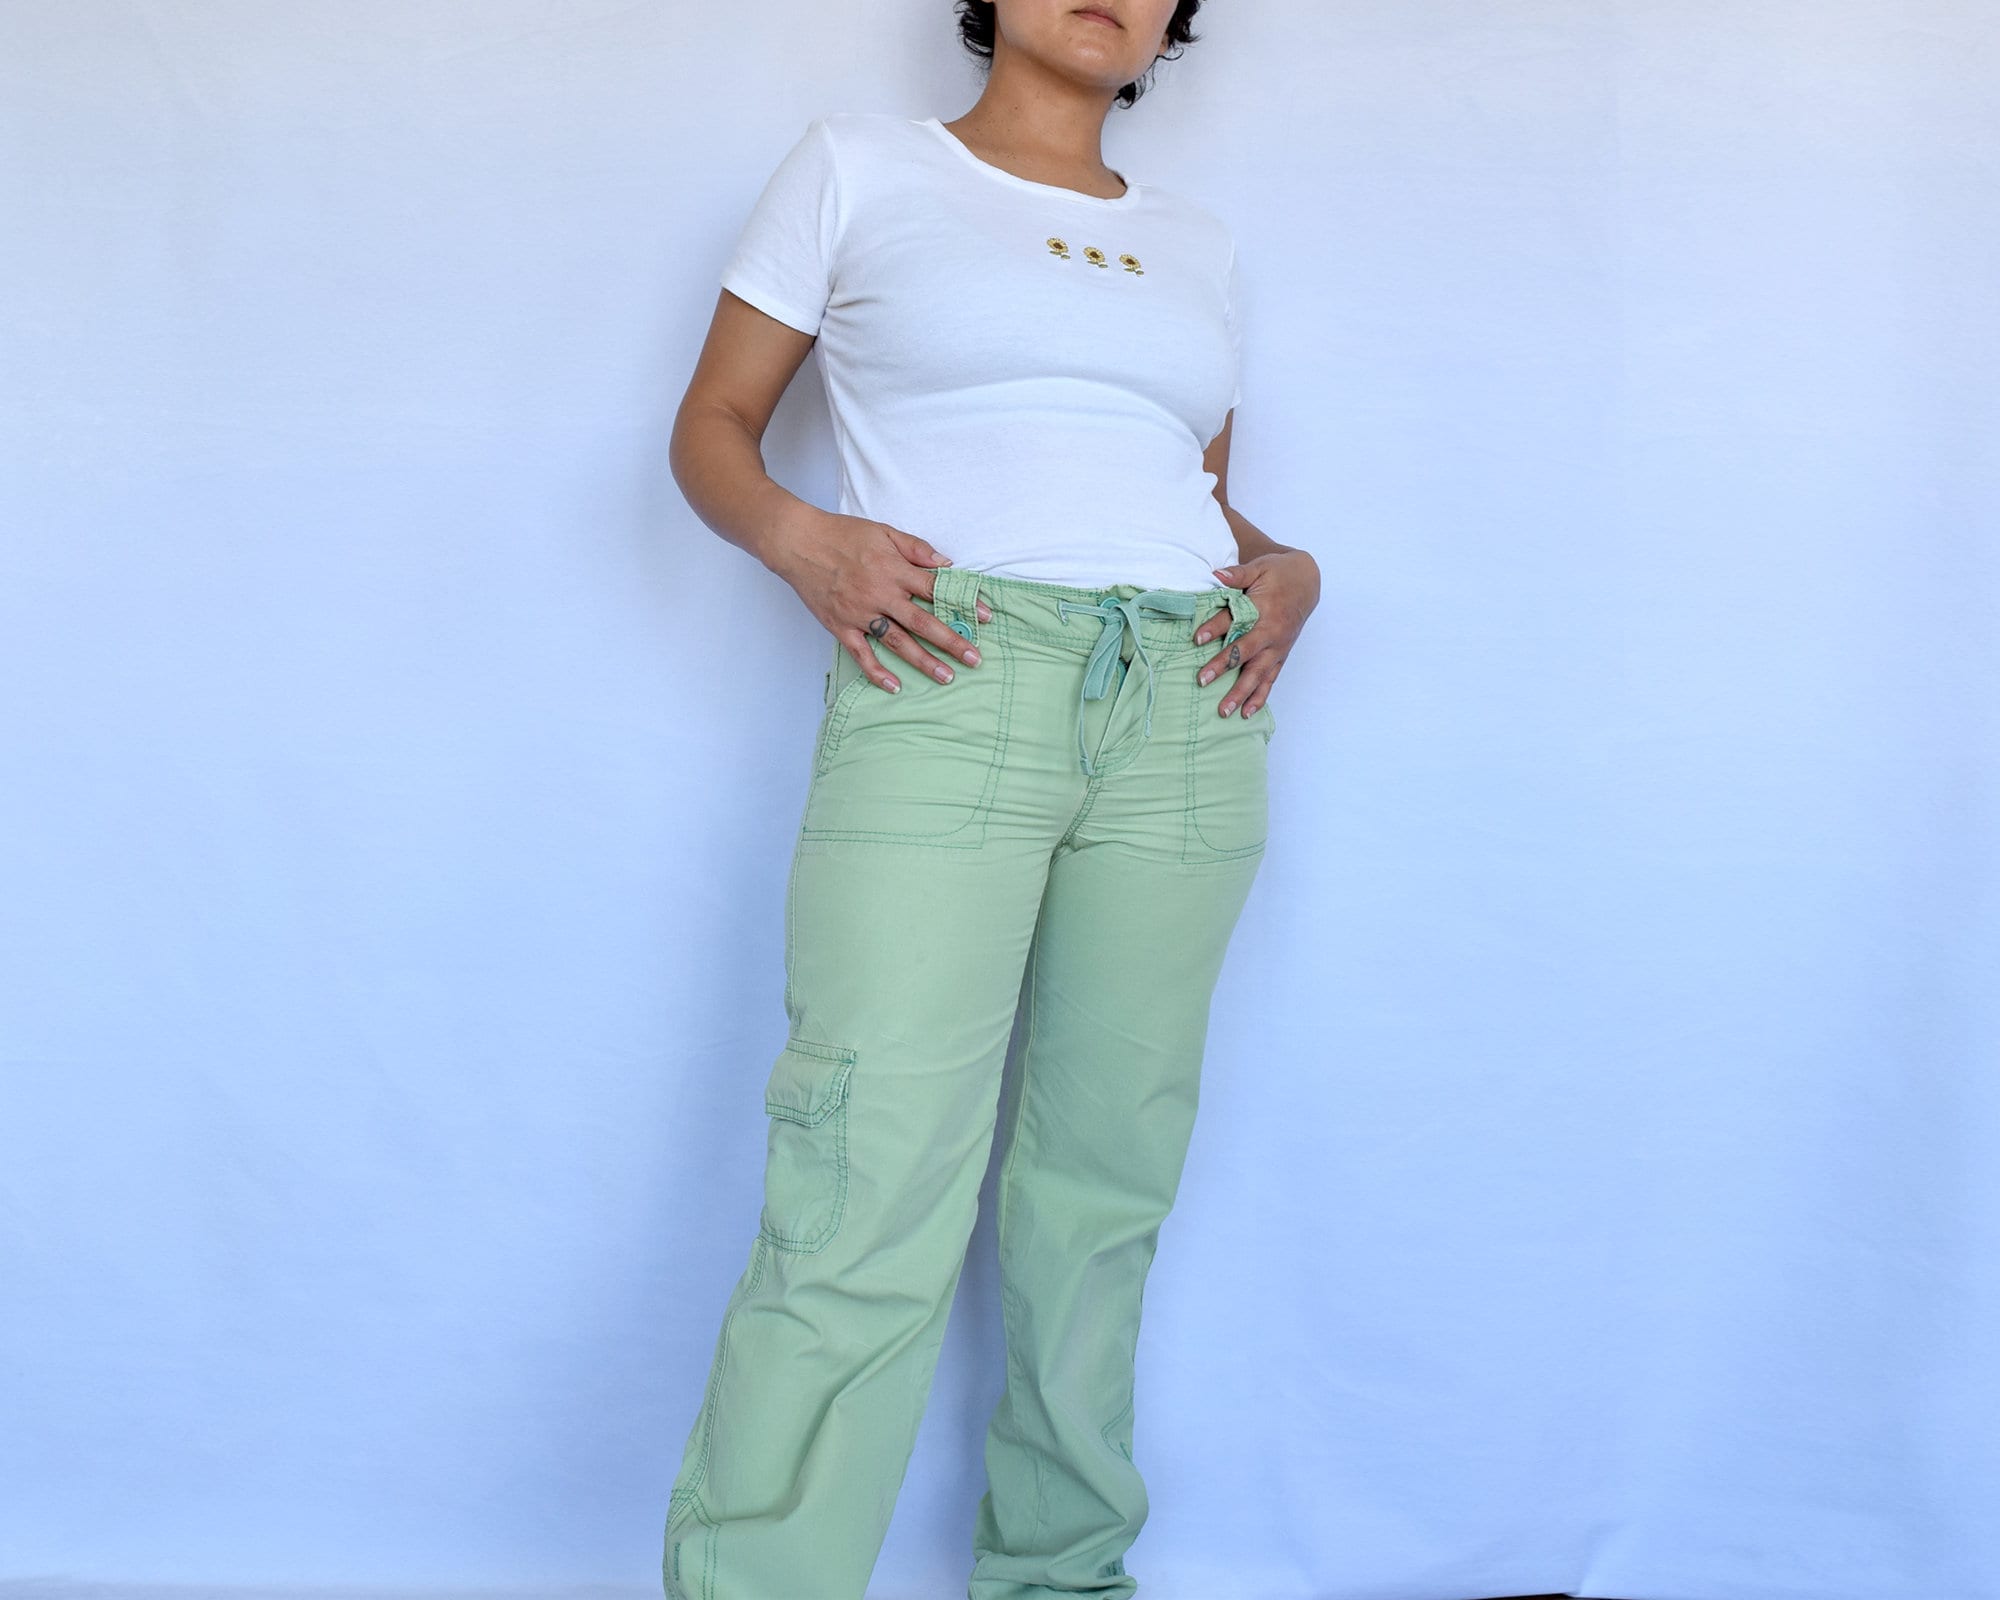 Buy Green Gap Twill Cotton Cargo Pants Online At Best Prices | Tistabene